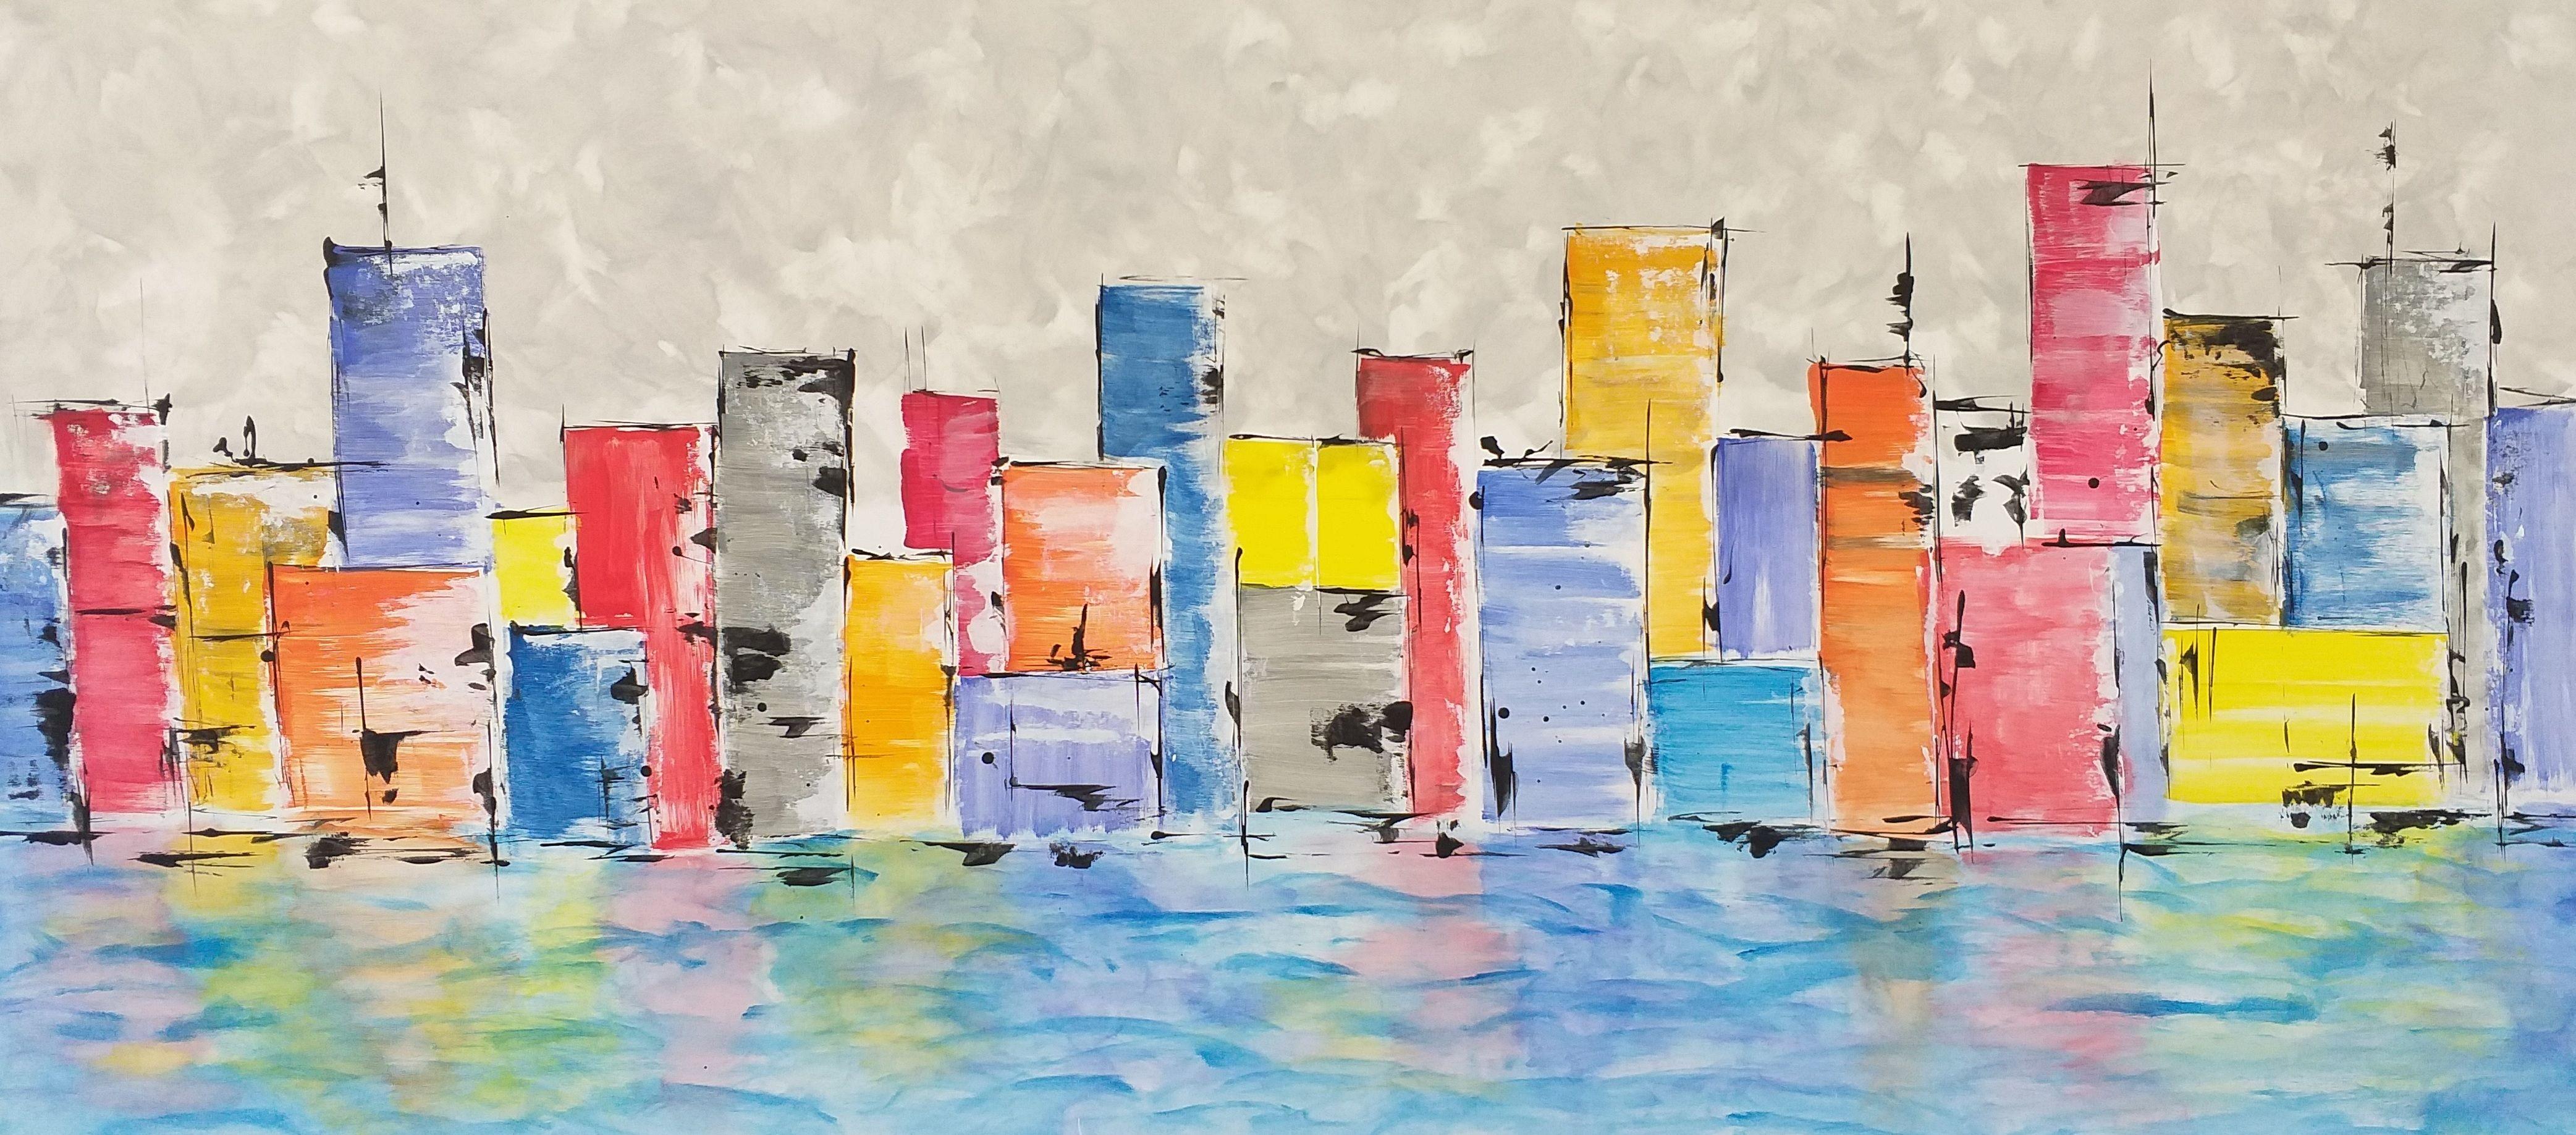 Max Yaskin Abstract Painting - Â« Megapolis 4 Â» by M.Y., Painting, Acrylic on Canvas